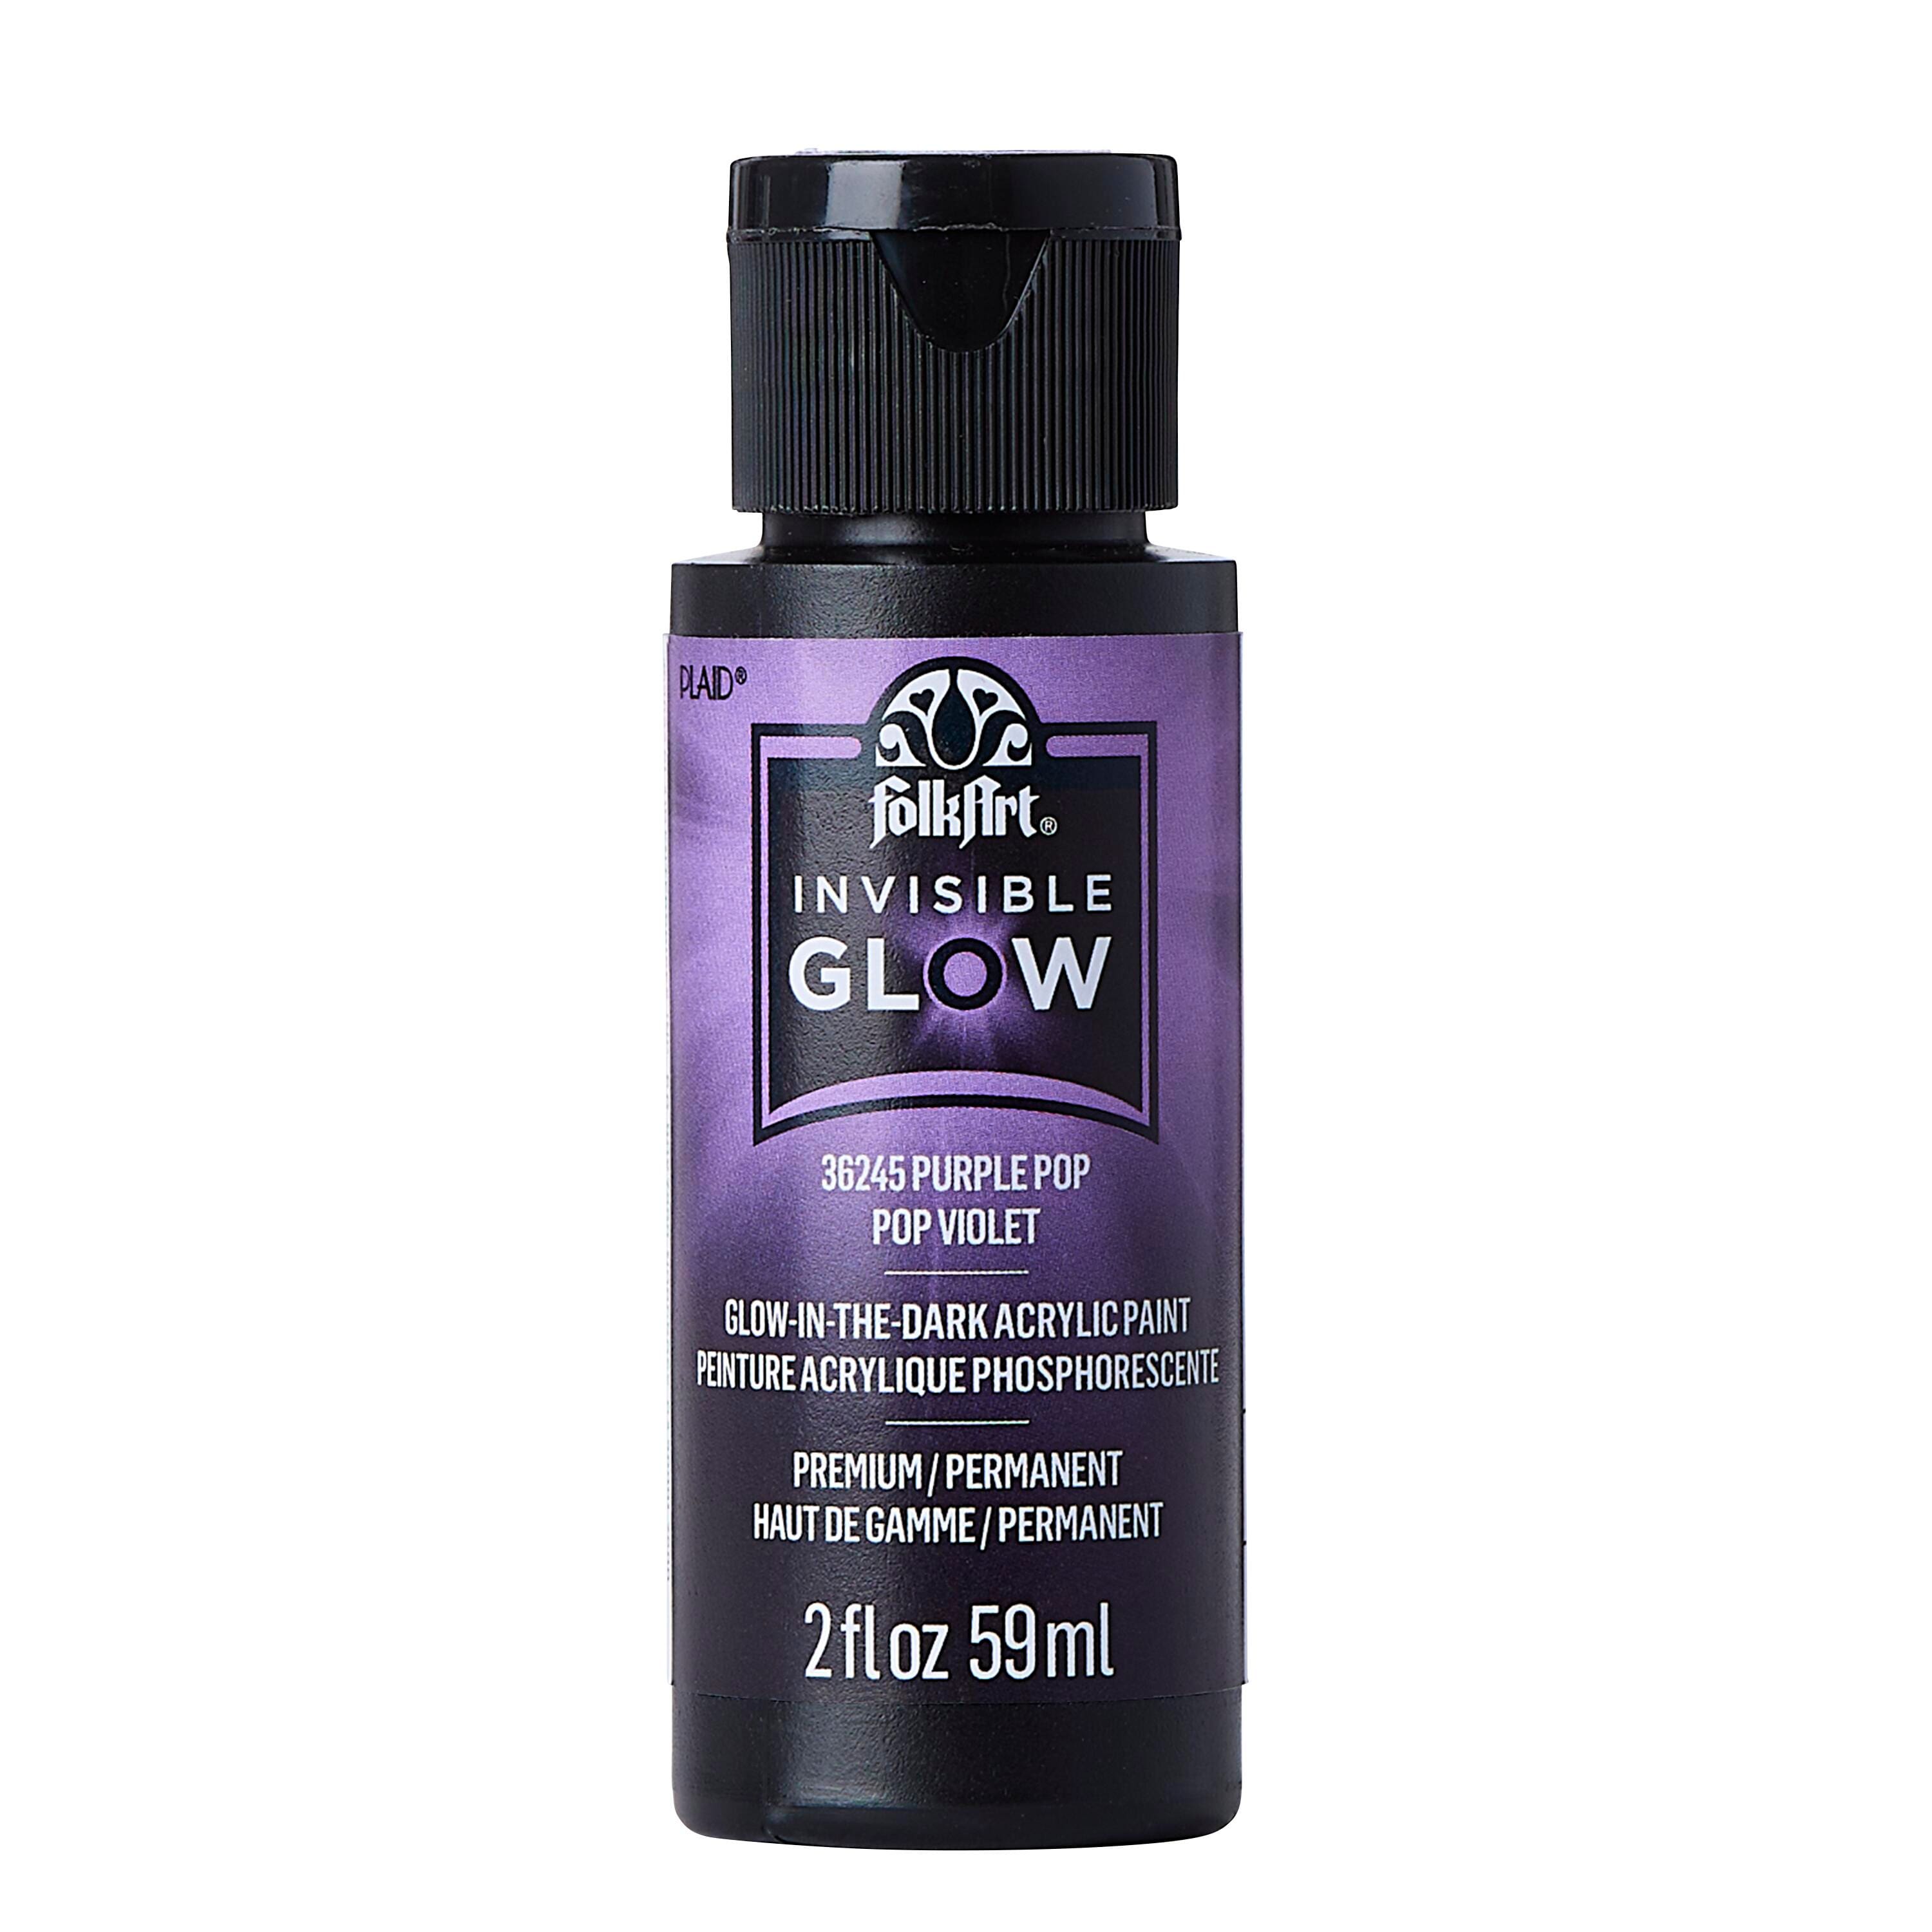 Glow In The Dark Acrylic Paint - Acrylic Paint - Paint - Paint & Adhesives  - The Craft Shop, Inc.